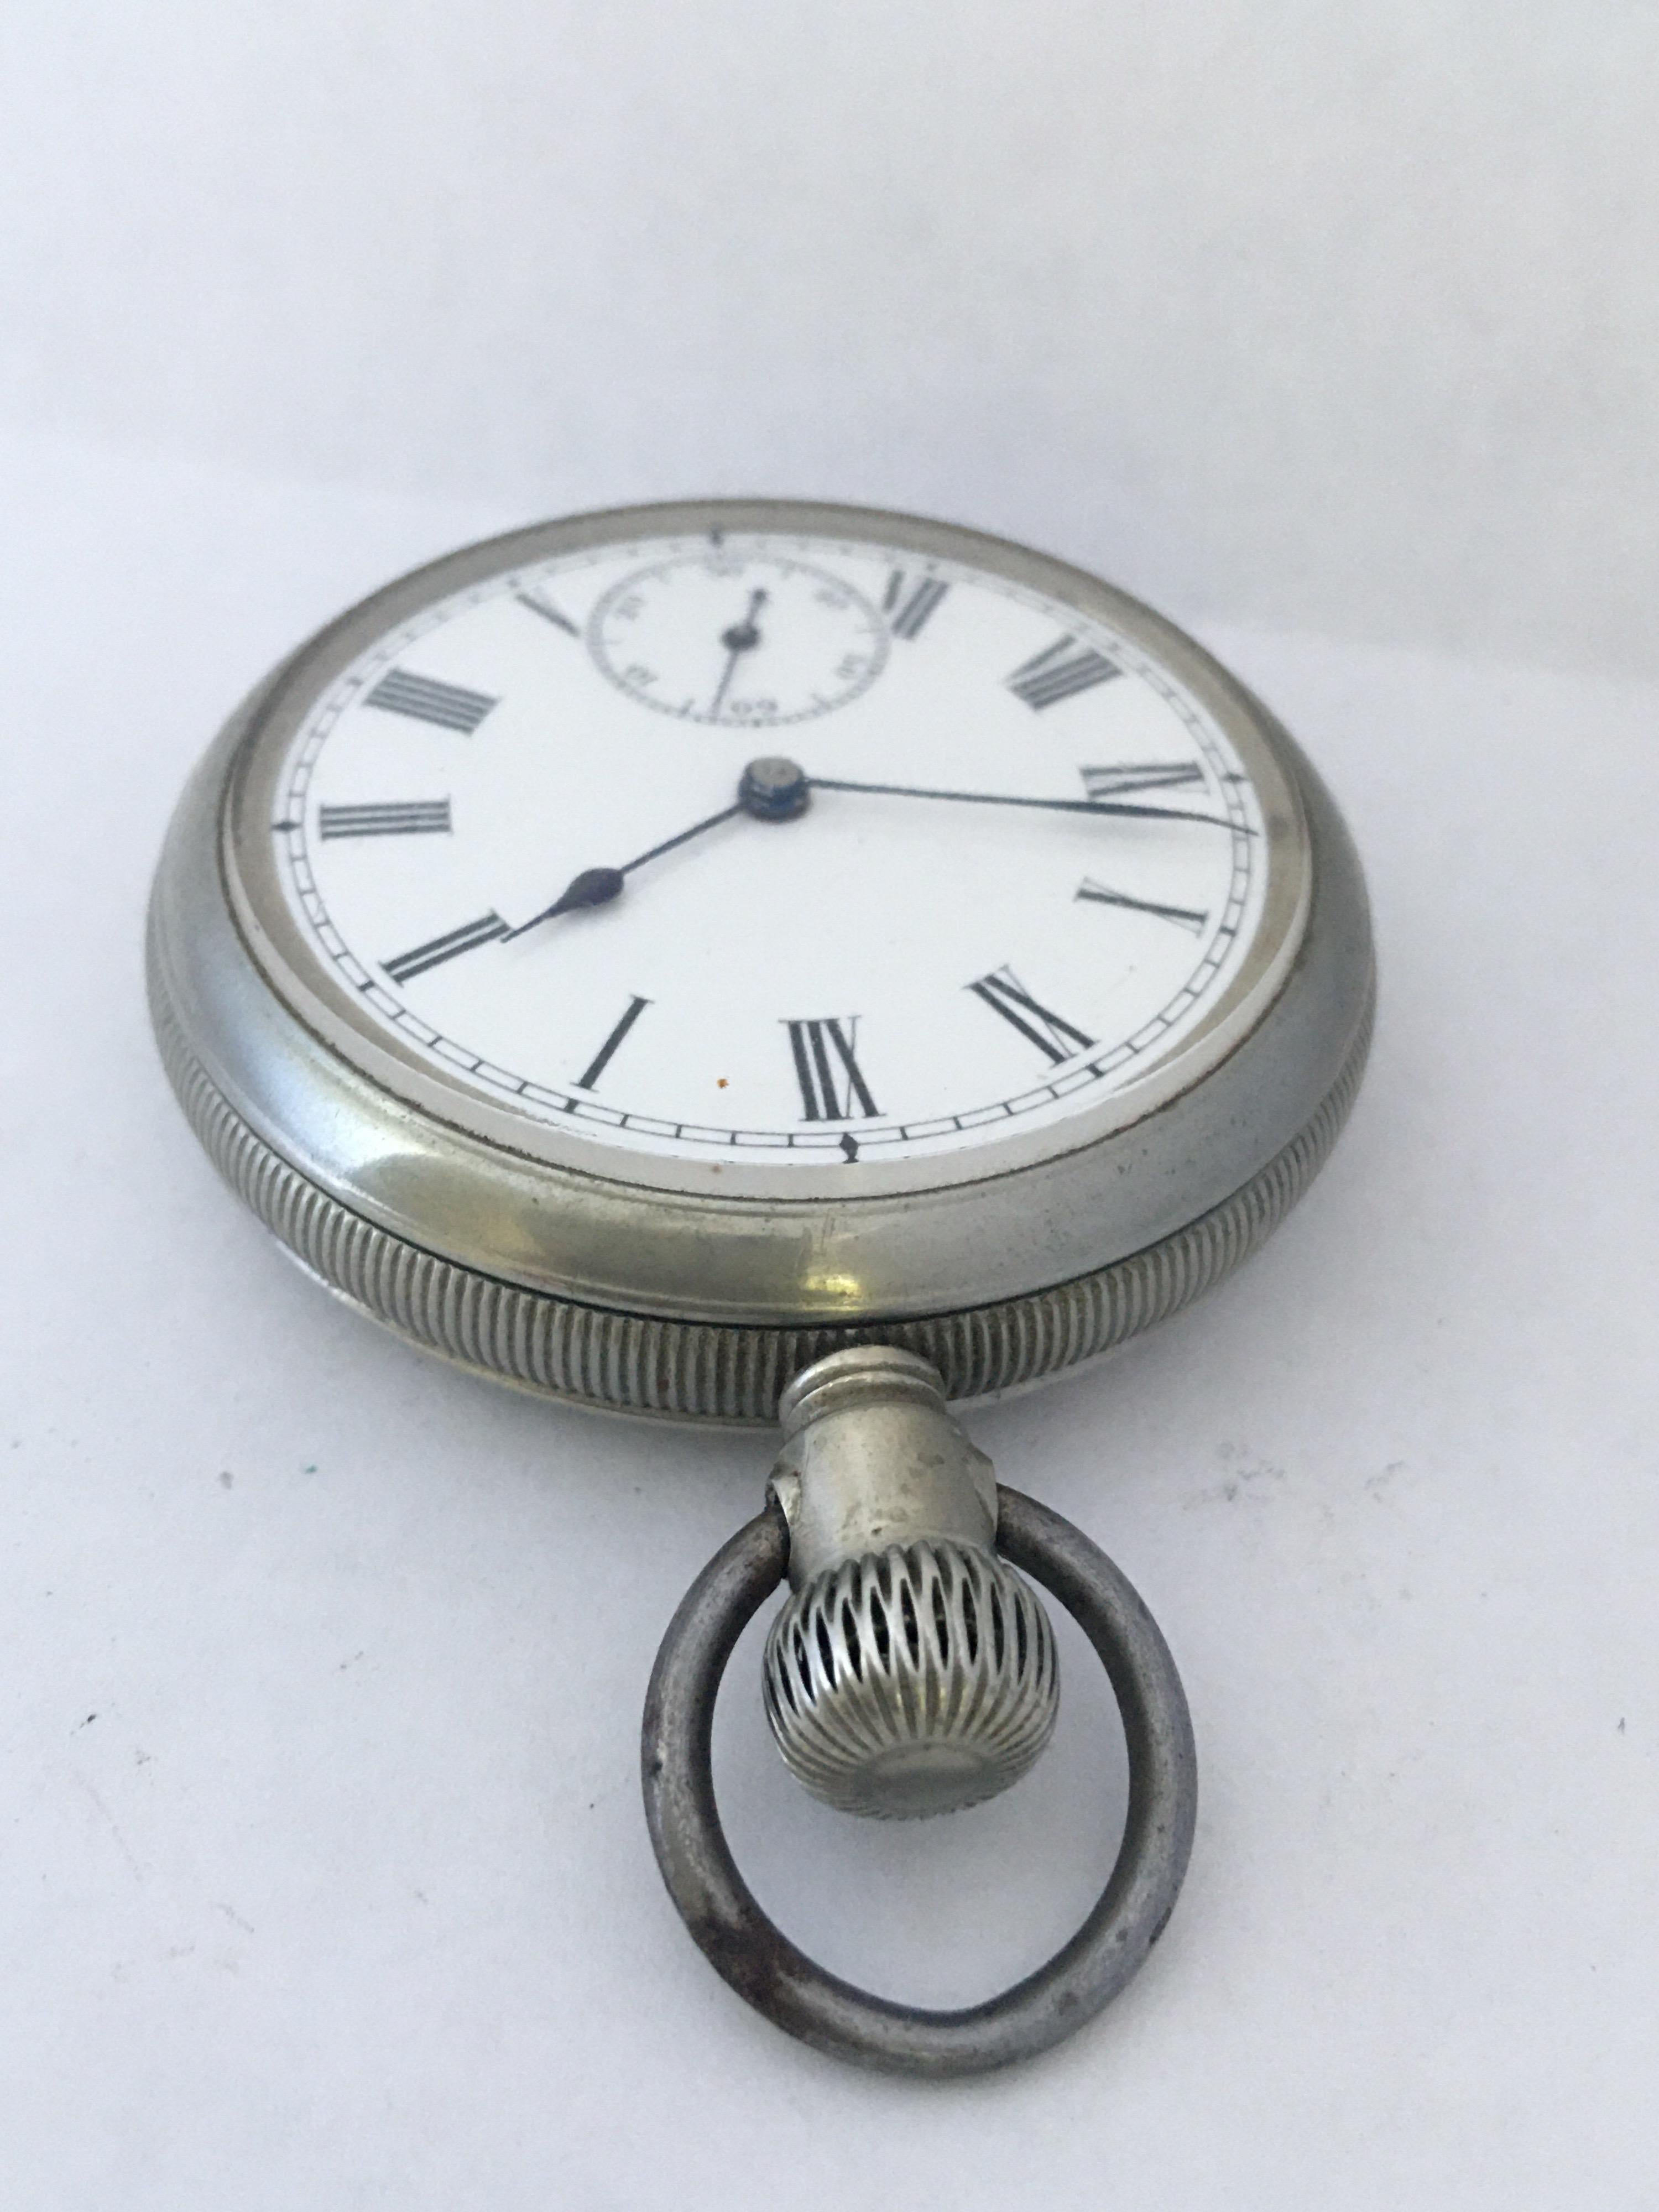 Antique Waterbury & Watch Co. Hand-Winding Pocket Watch For Sale 3